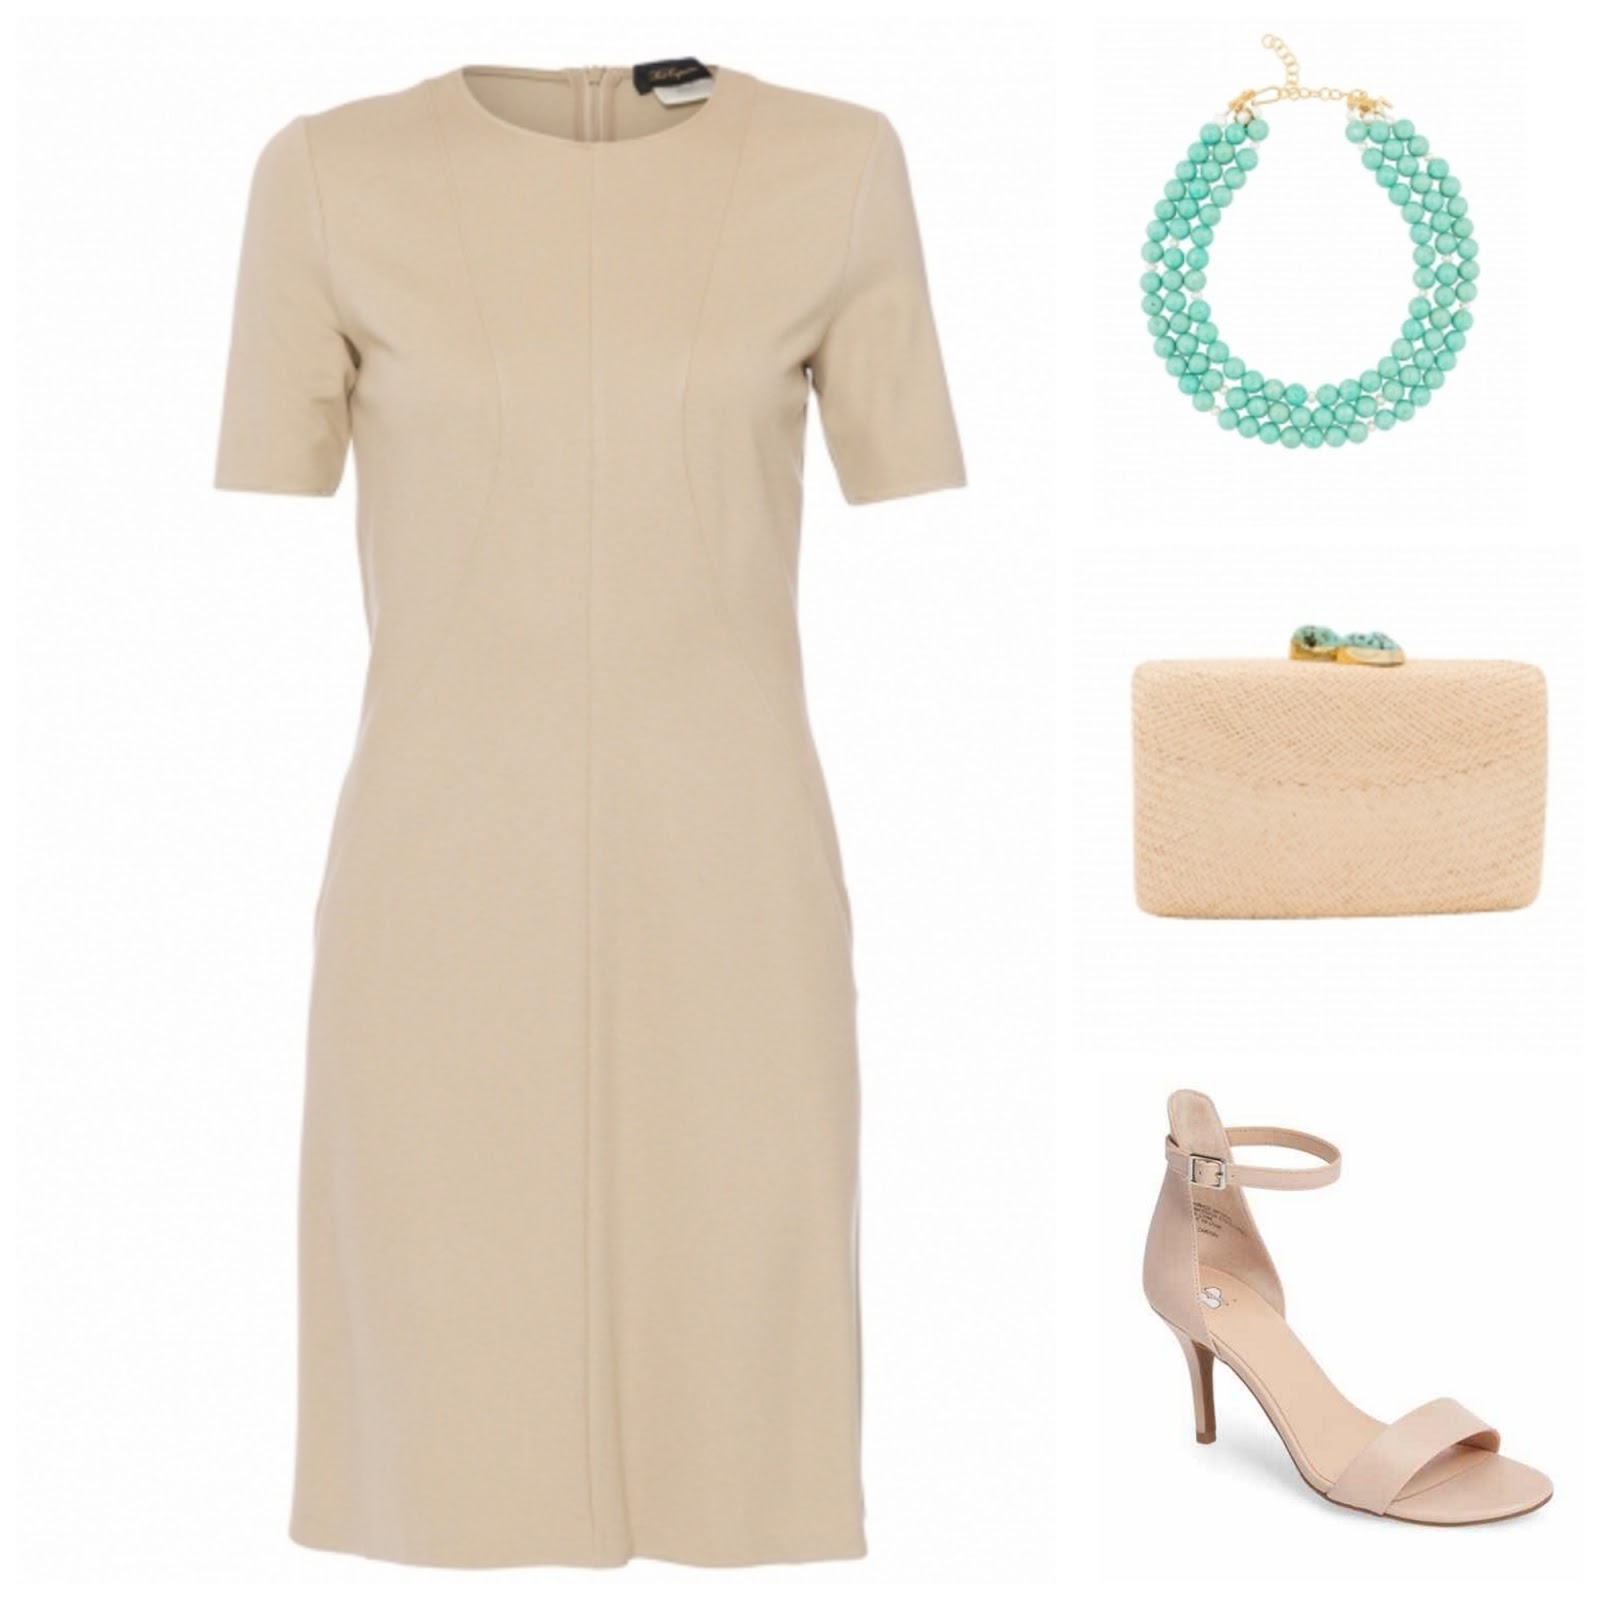 The Daily Connoisseur: 7 Ways to Style a Neutral Dress featuring  Halsbrook.com